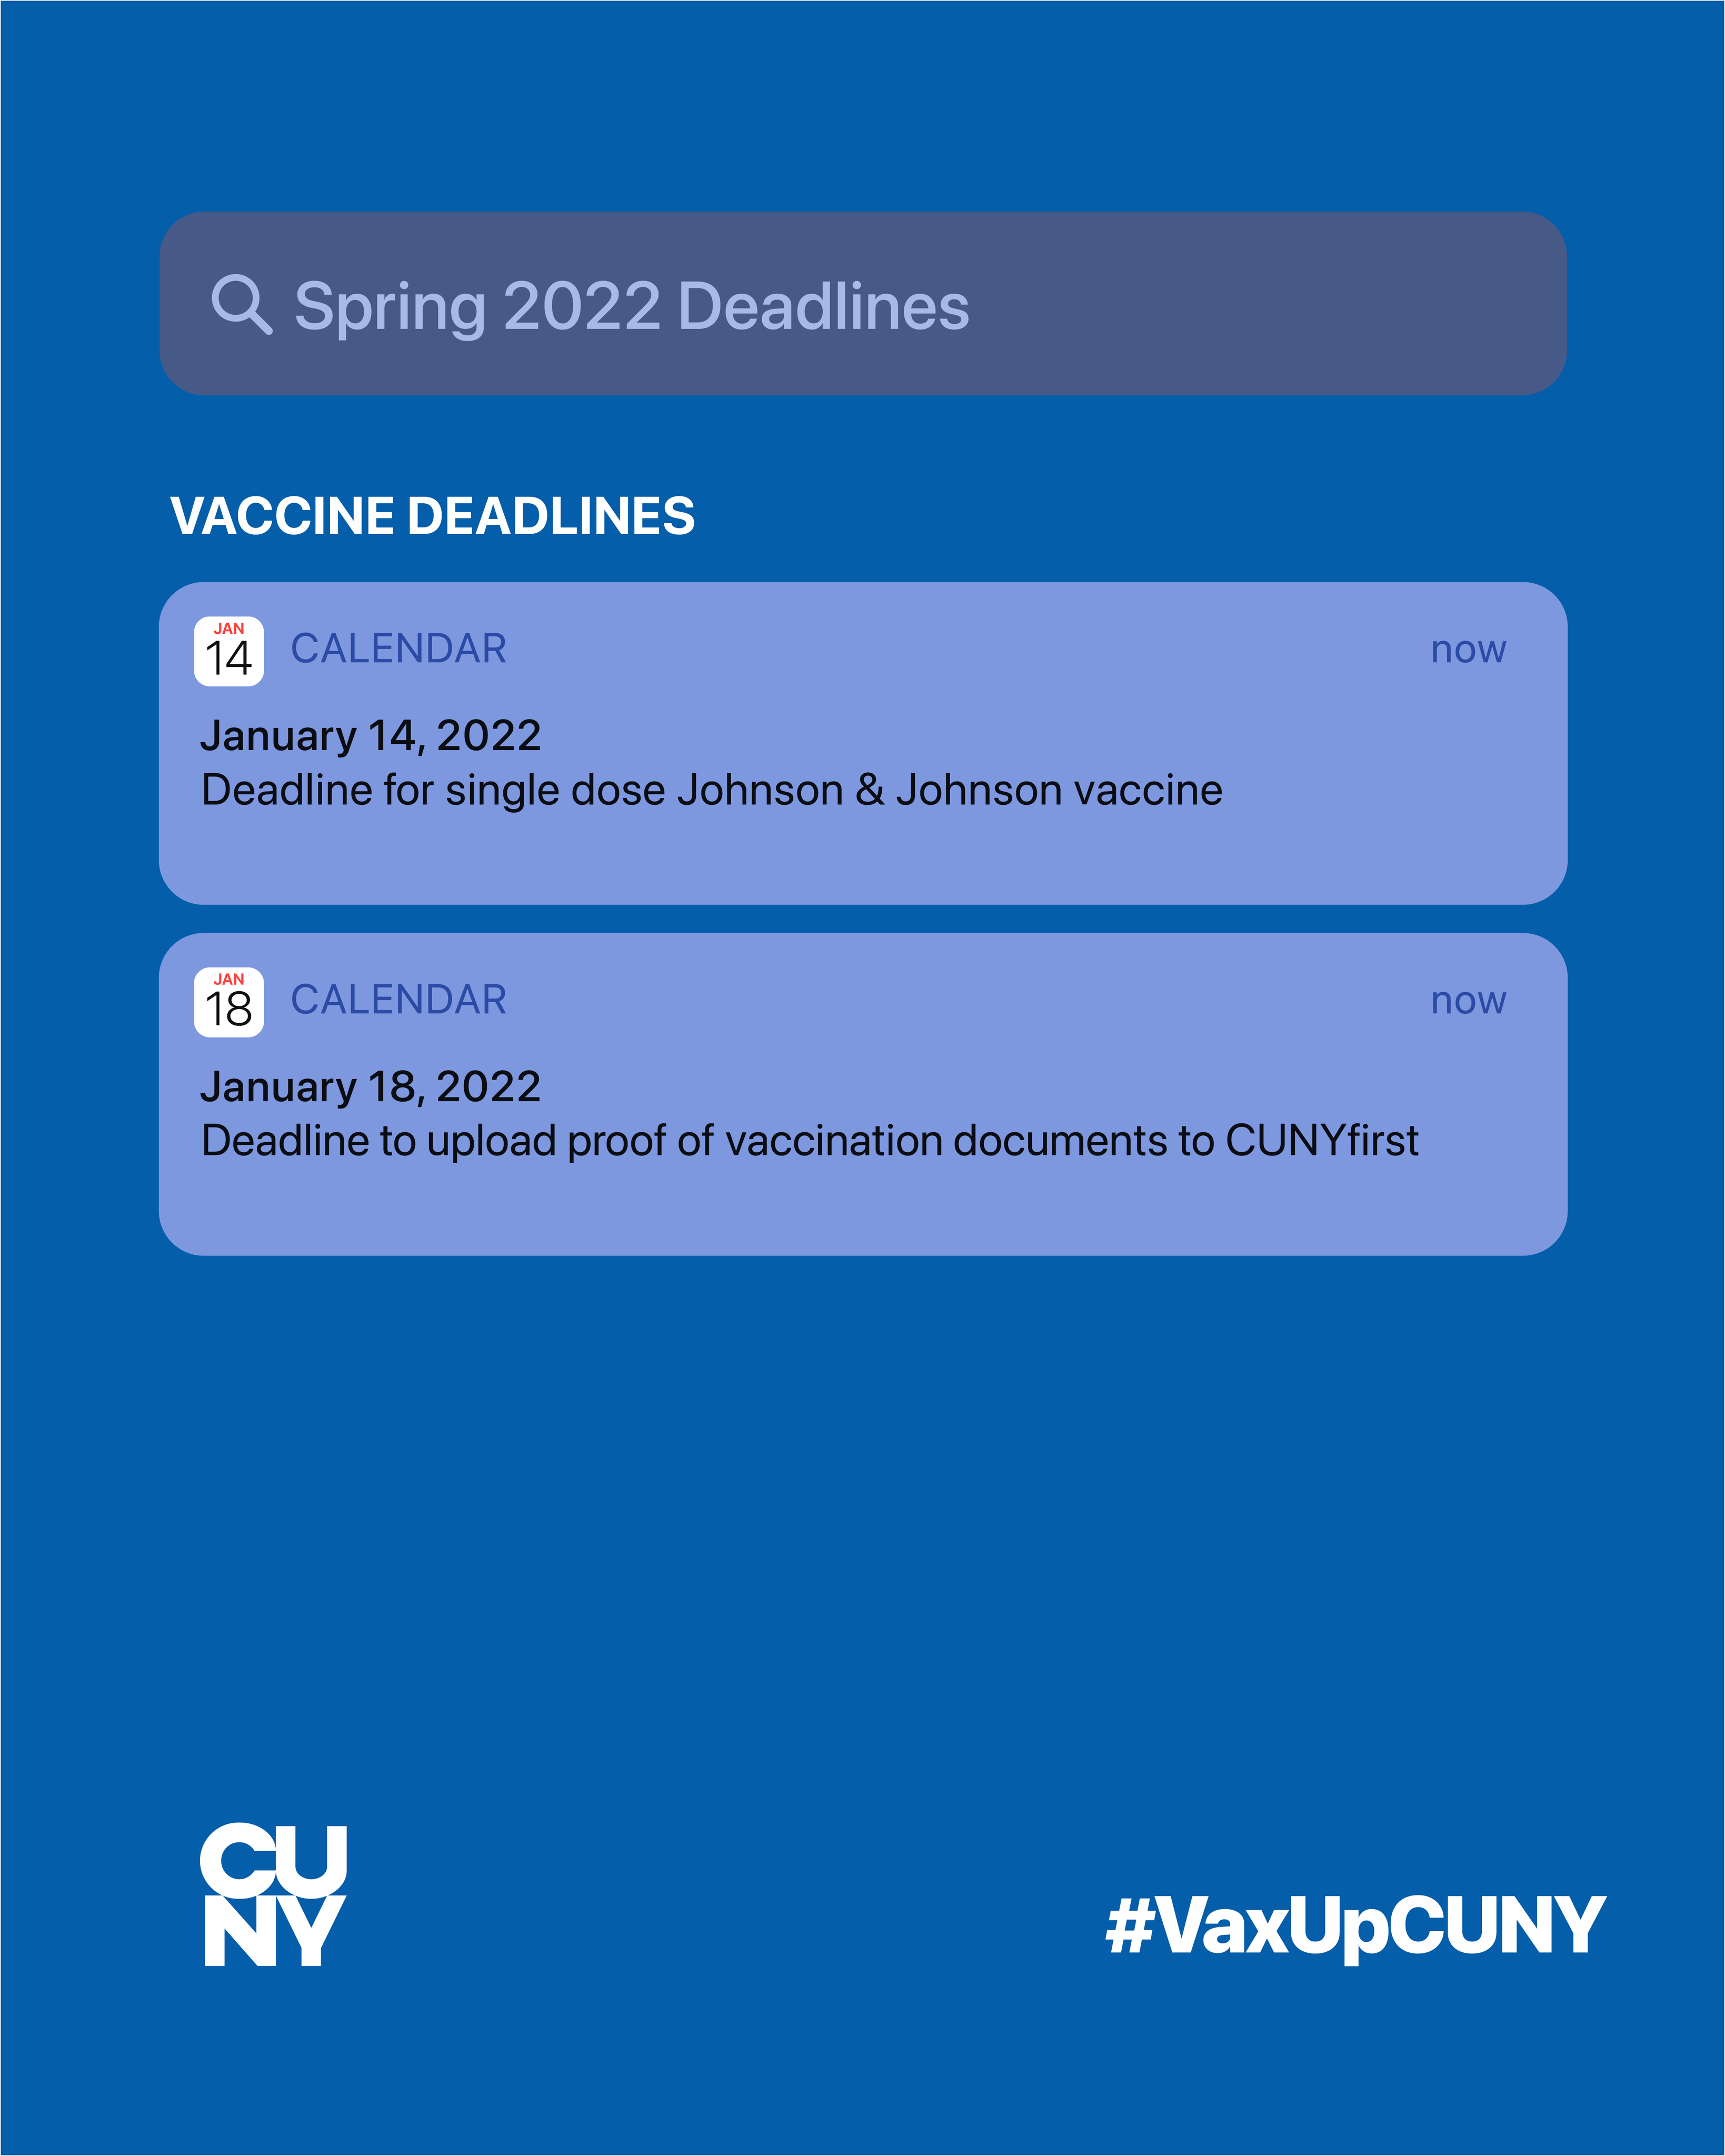 Cuny Spring 2022 Calendar The City University Of New York On Twitter: "Students Enrolled In Hybrid  And In-Person Classes Are Required To Be Vaccinated. 🗓️1/14: Deadline To  Get The Johnson & Johnson Vaccine 🗓️1/18: Deadline To